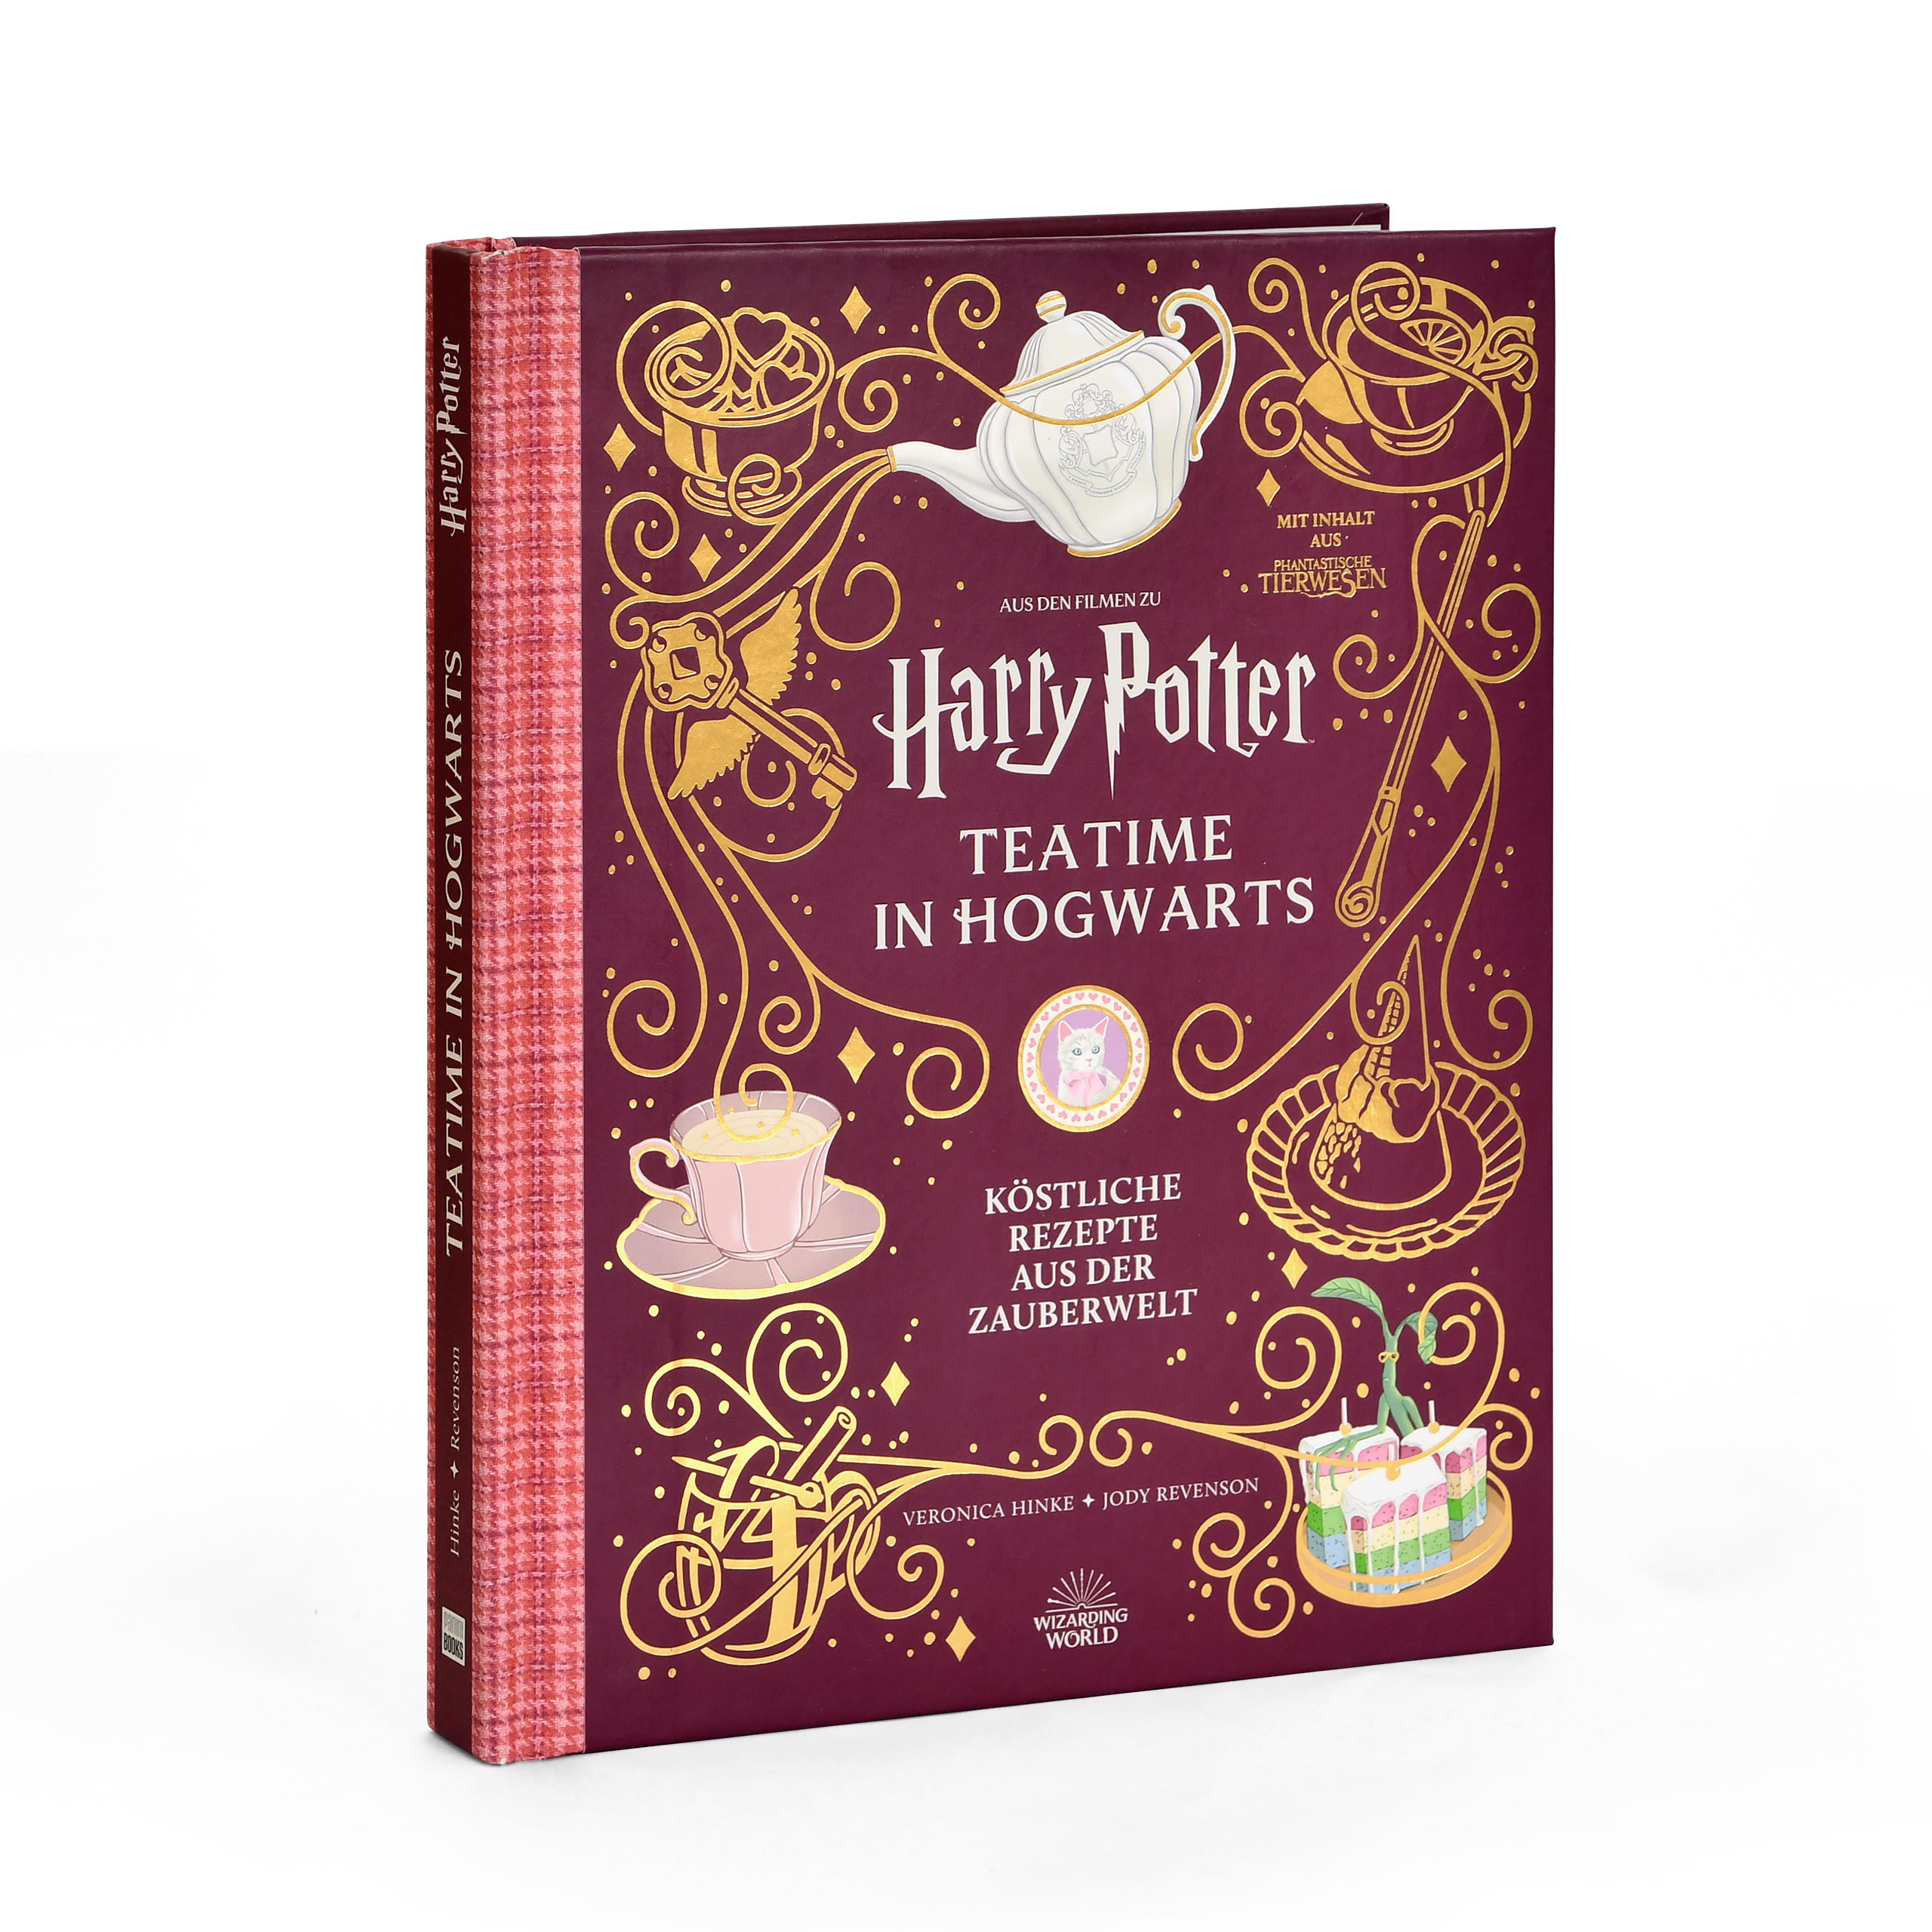 Harry Potter - Teatime in Hogwarts - Delicious Recipes from the Wizarding World